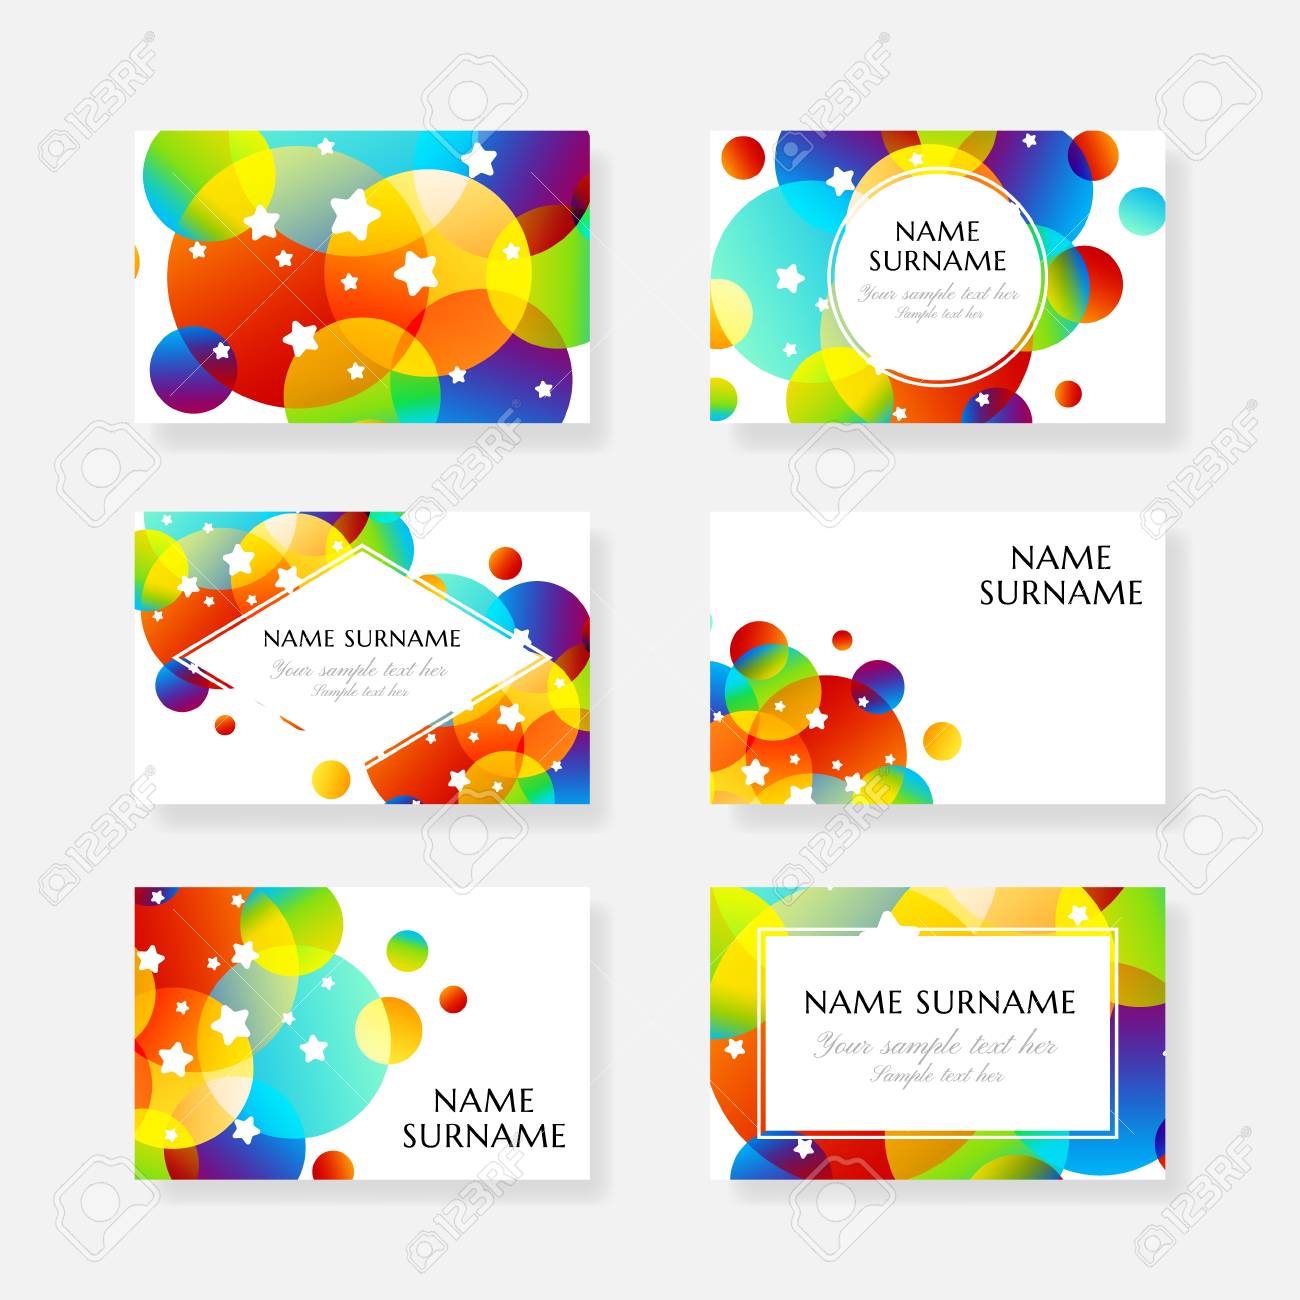 business cards for kids 2